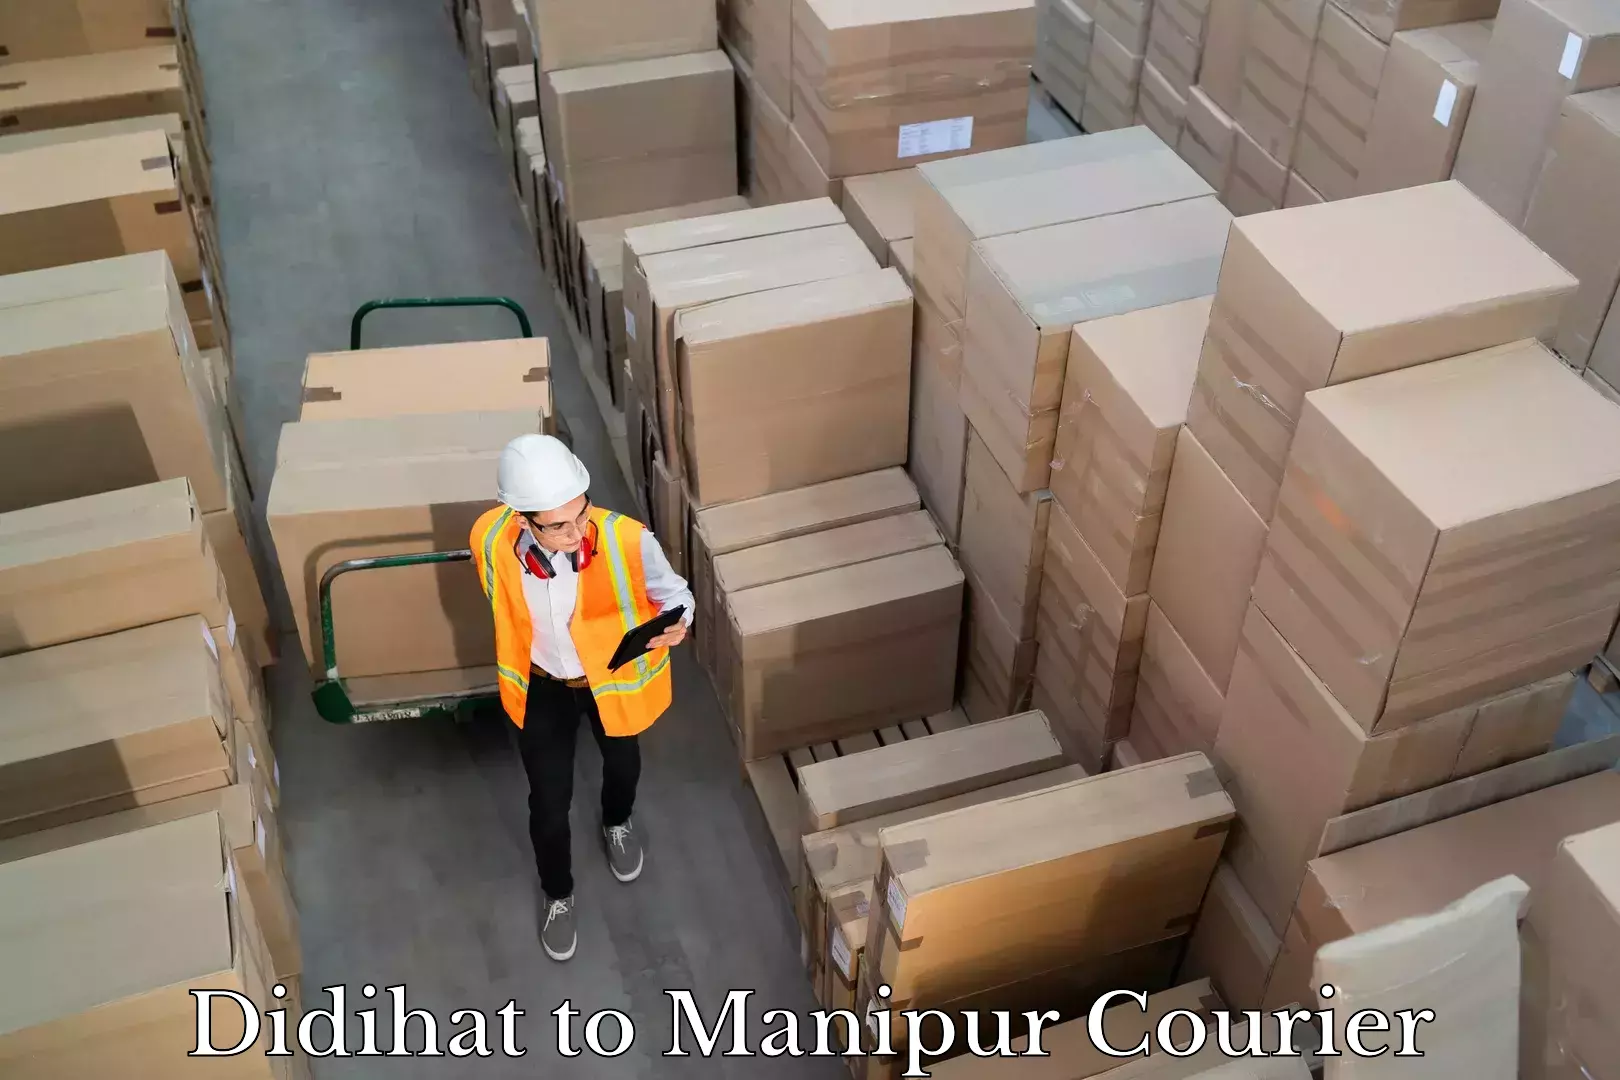 Business delivery service Didihat to Manipur